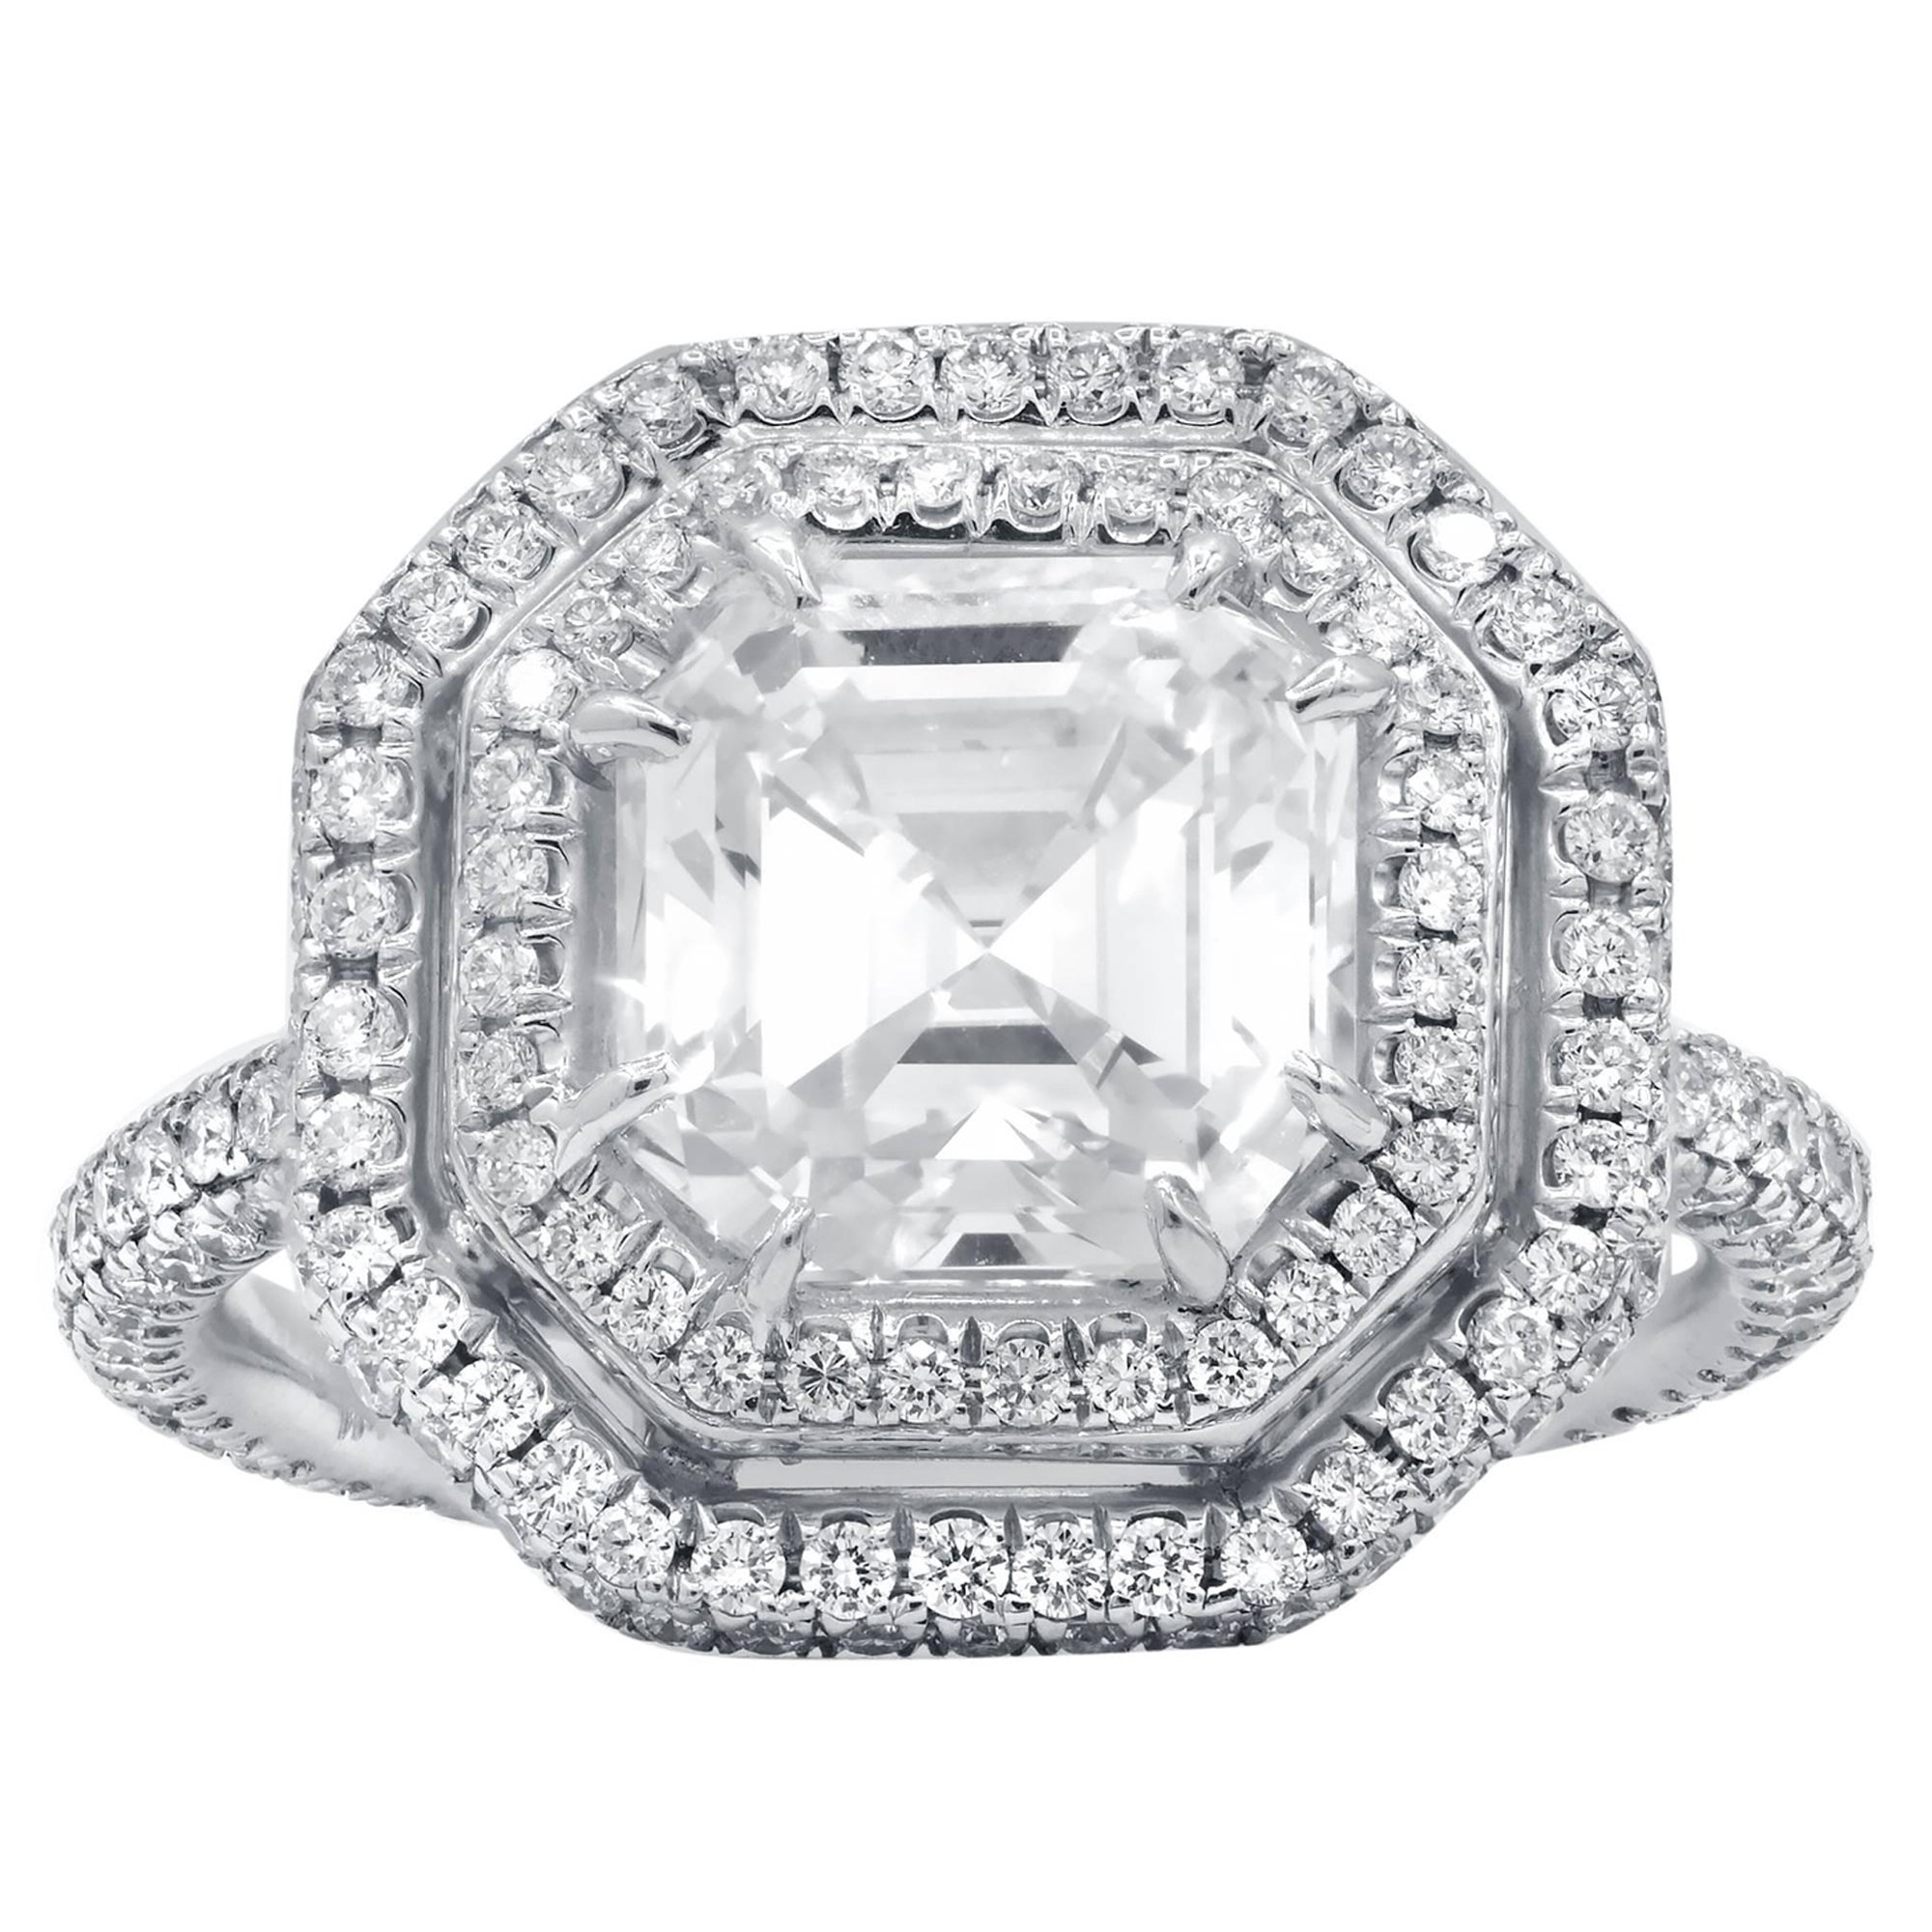 Platinum Custom designed and GIA certified diamond engagement ring with square emerald cut diamond in the center features 3.01 carat I color/VS1 clarity and  set in beautiful double halo setting with 1.40 carats natural round brilliant cut